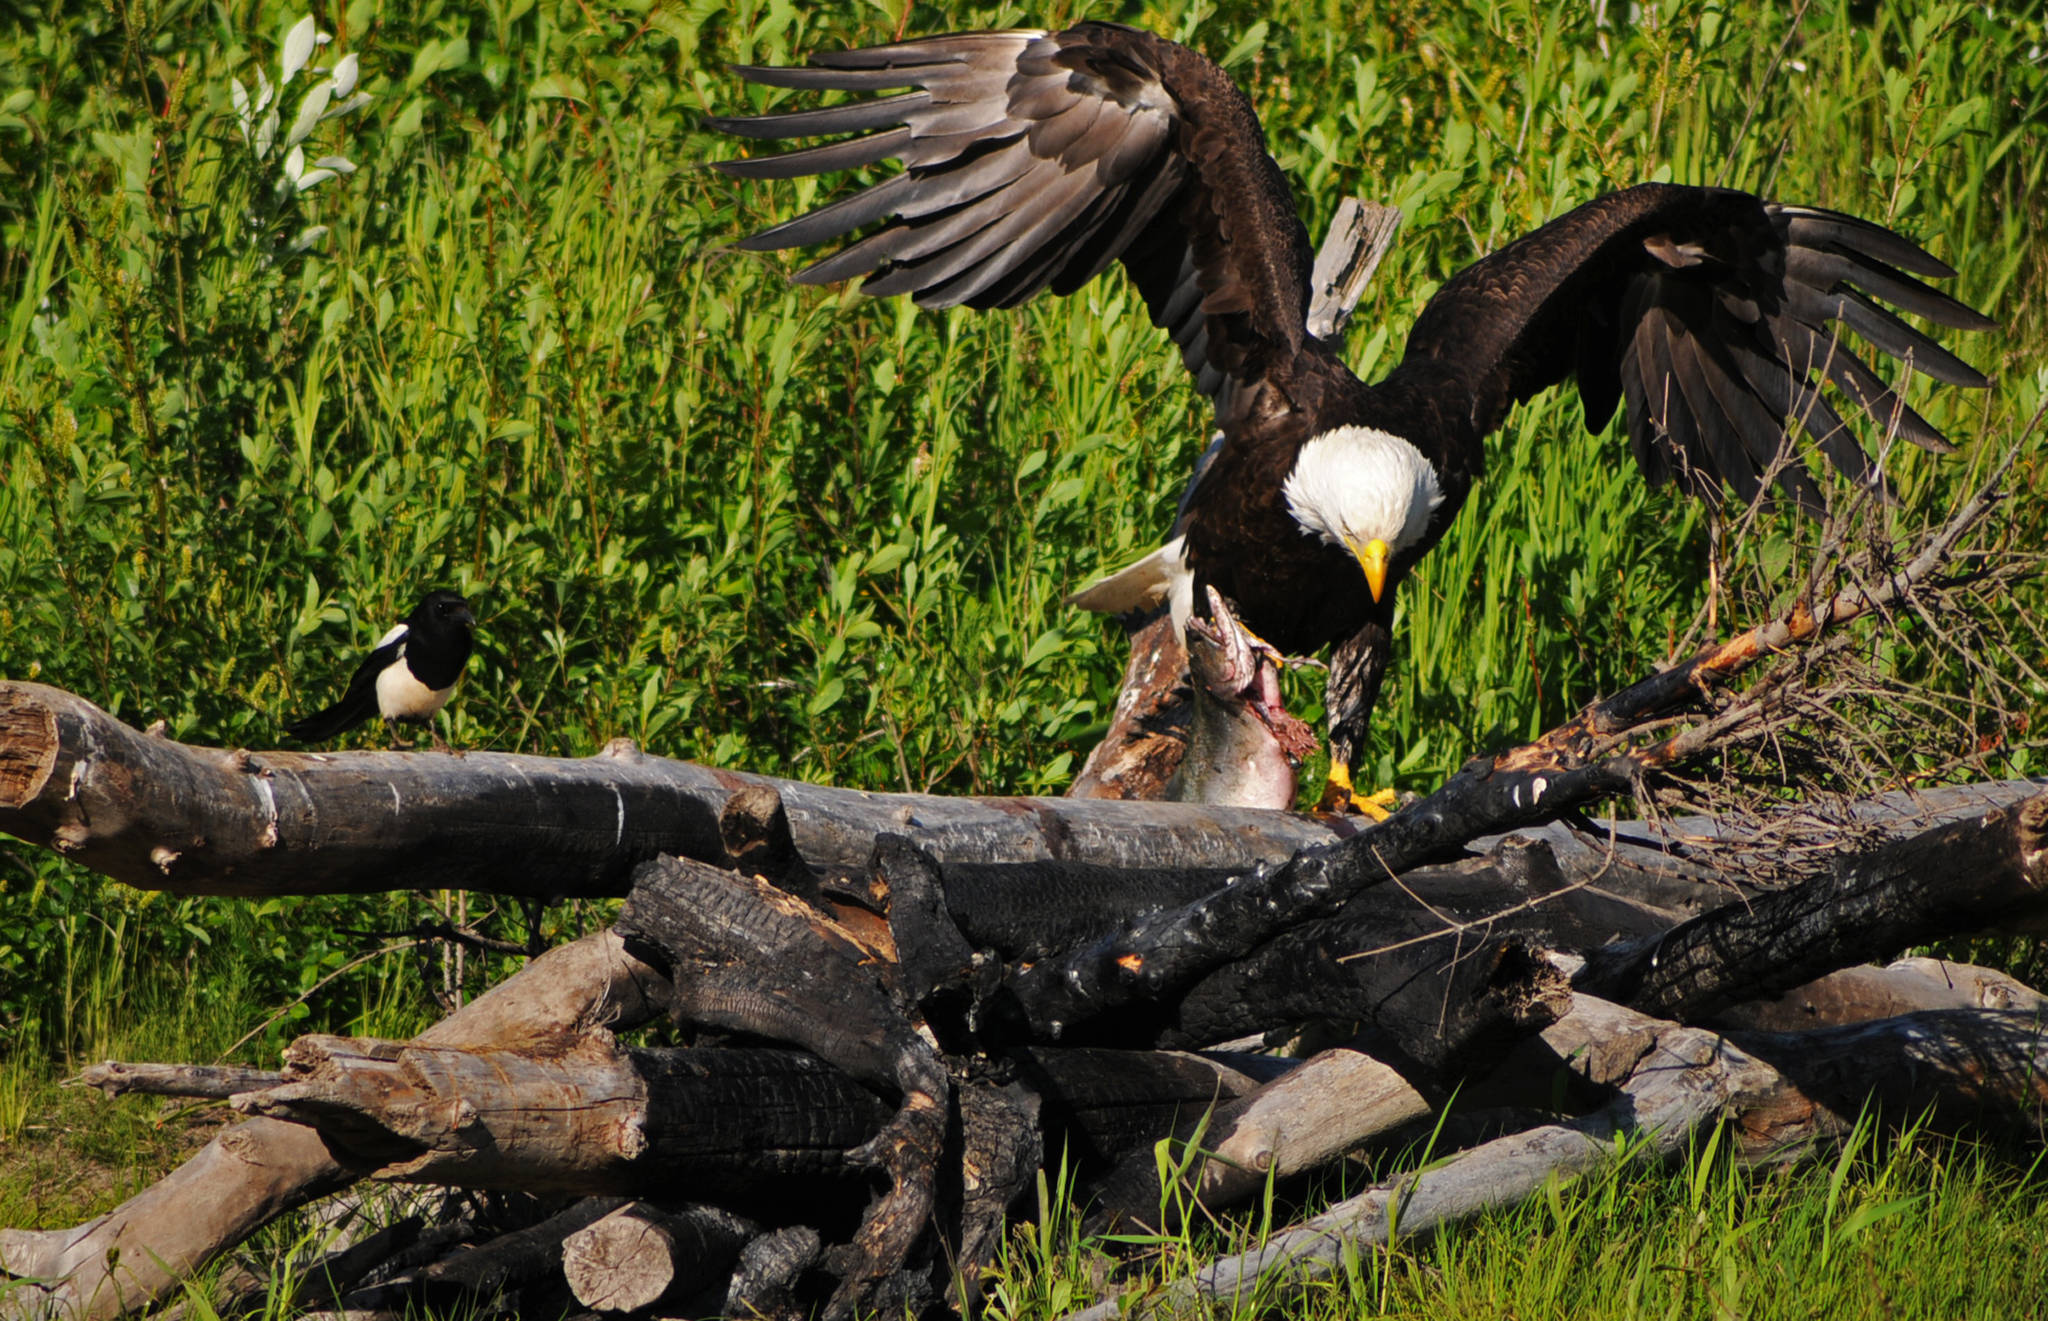 A bald eagle fends off a speculating magpie from his meal of salmon on the Anchor River on Sunday, June 25, 2017 near Anchor Point, Alaska. (Photo by Elizabeth Earl/Peninsula Clarion, file)